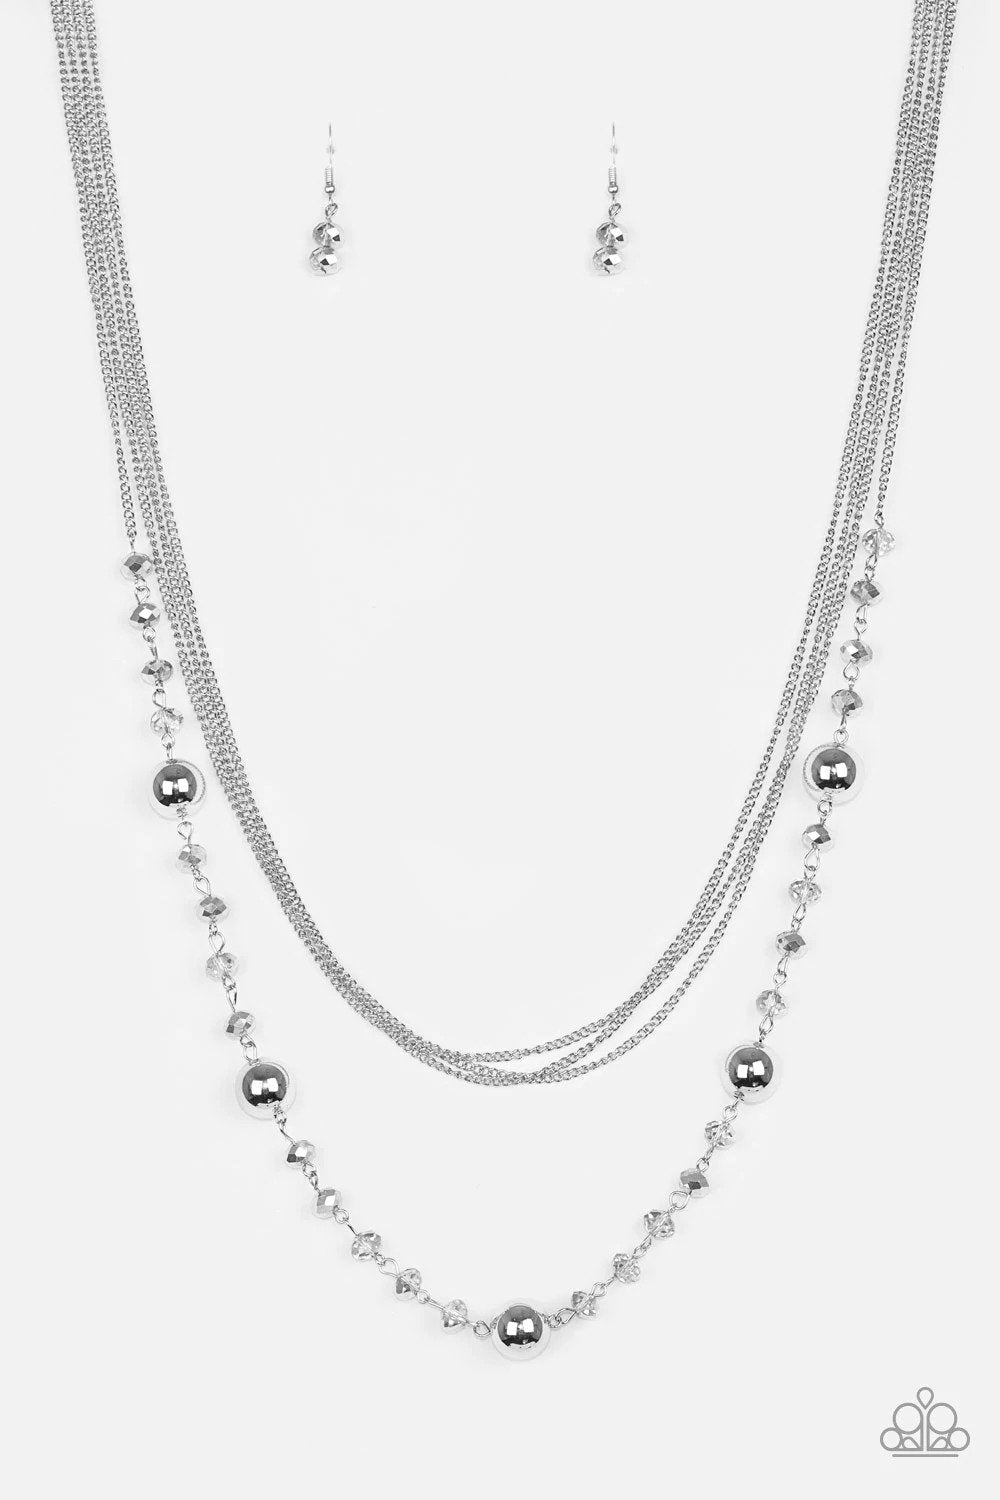 High Standards Silver Necklace - Paparazzi Accessories- lightbox - CarasShop.com - $5 Jewelry by Cara Jewels